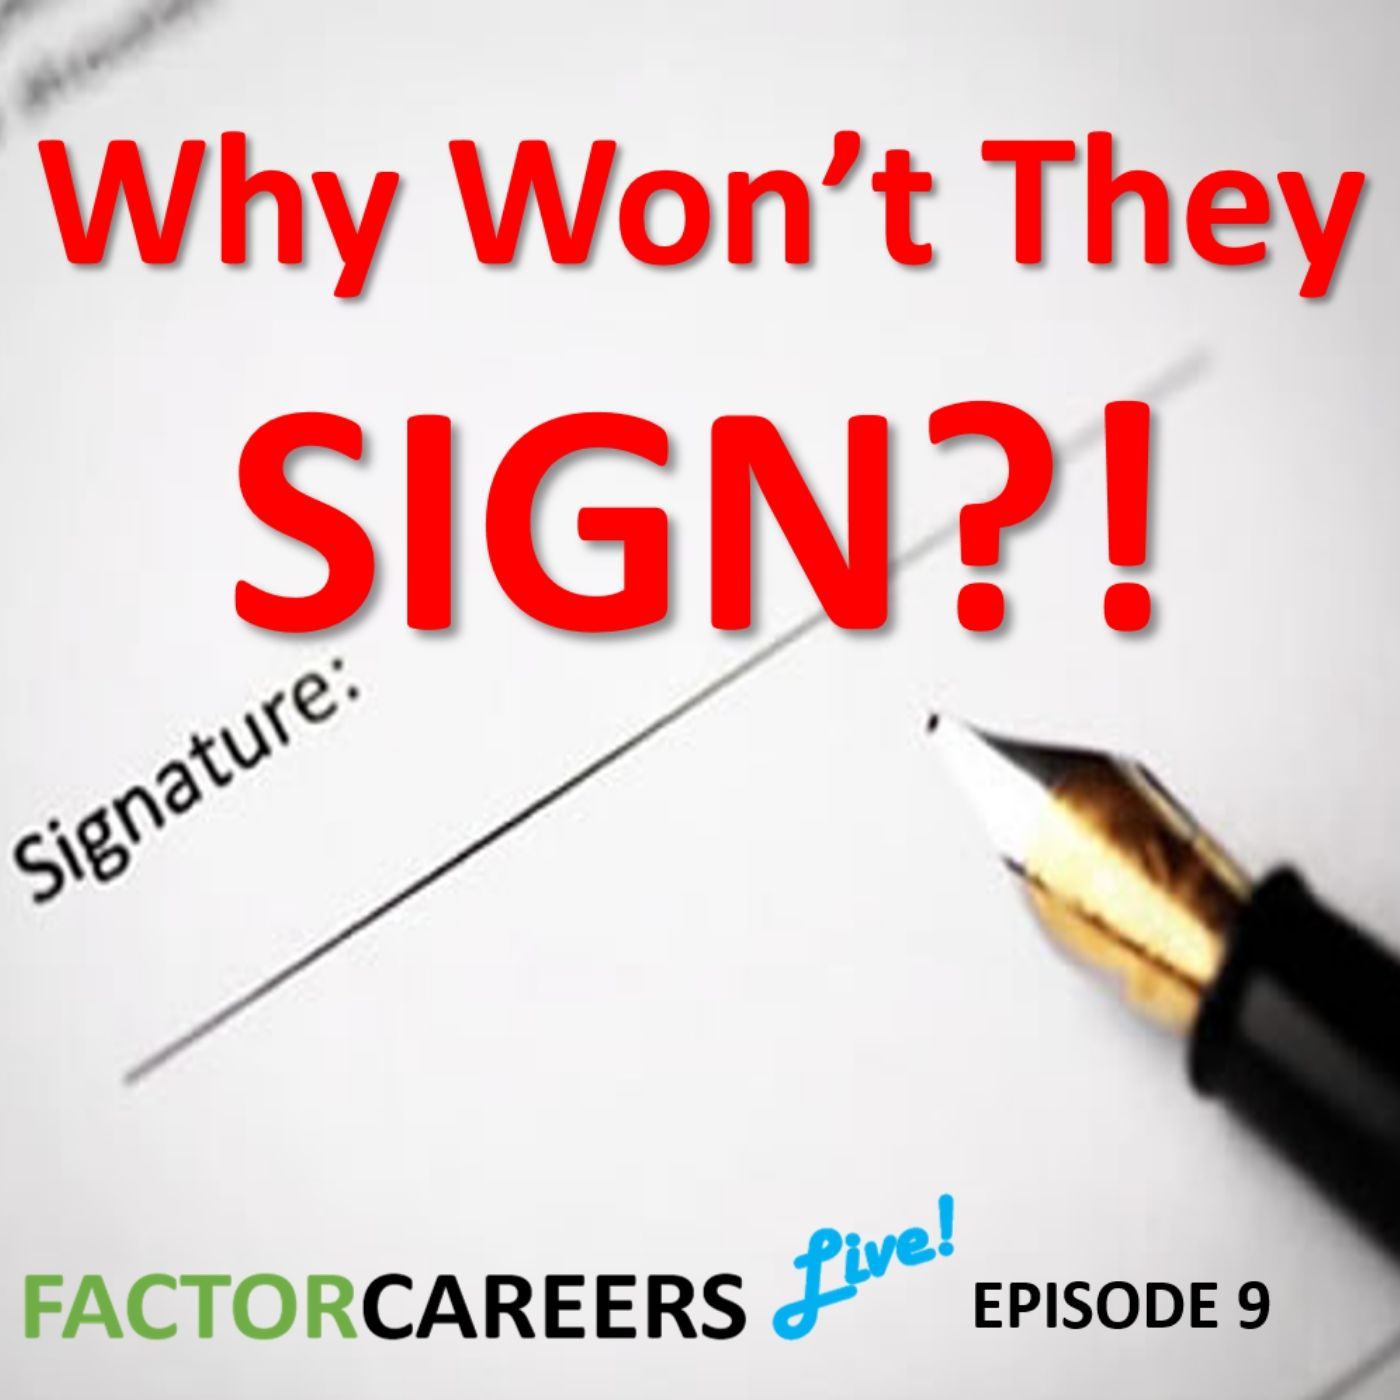 Episode 9 - Why Won't They Sign?! - FactorCareers Live!